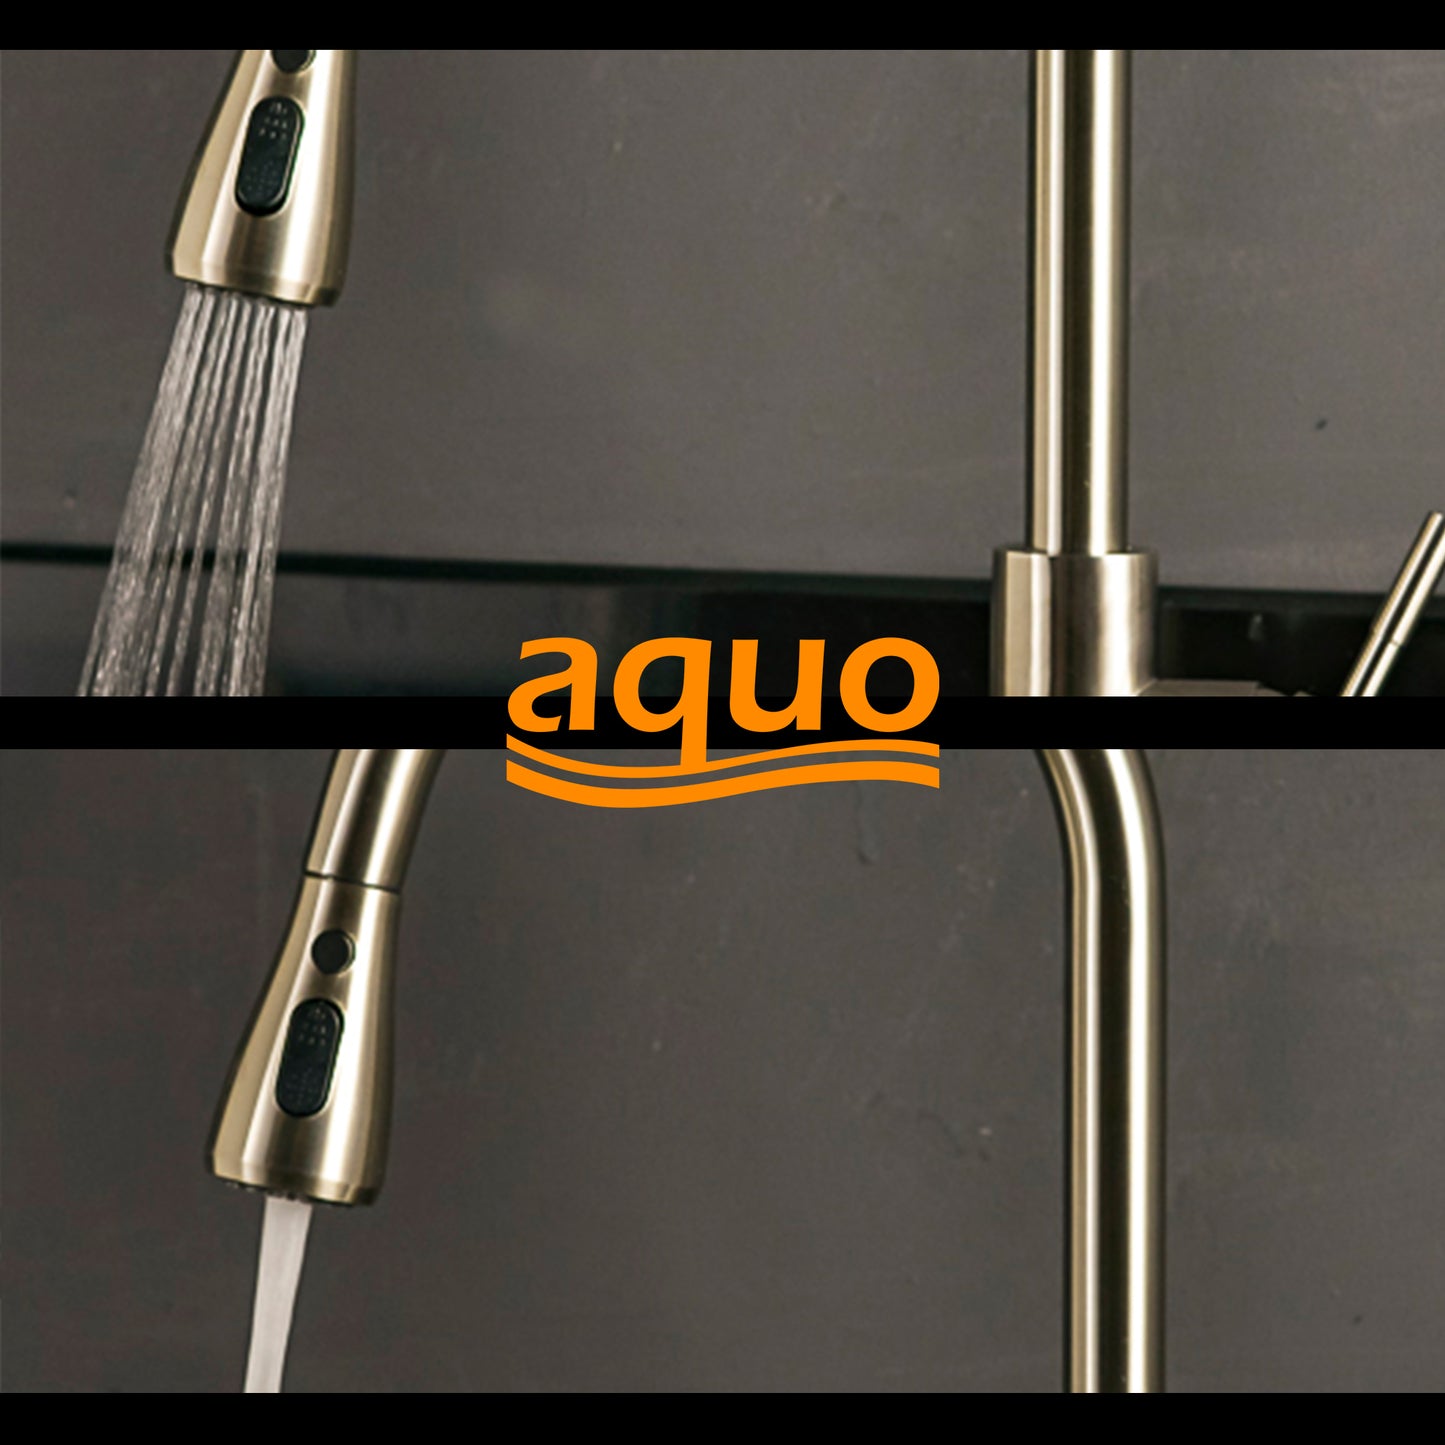 Aquo Kitchen Faucet - This Easy to Install 15" Height Sink Faucet Hole Variety Kitchen Countertops, Nicely Preventing Leaking Issue by Brass Kitchen Sink Faucet Inner Hoses Design, Brushed Nickel, Model-205001-BN